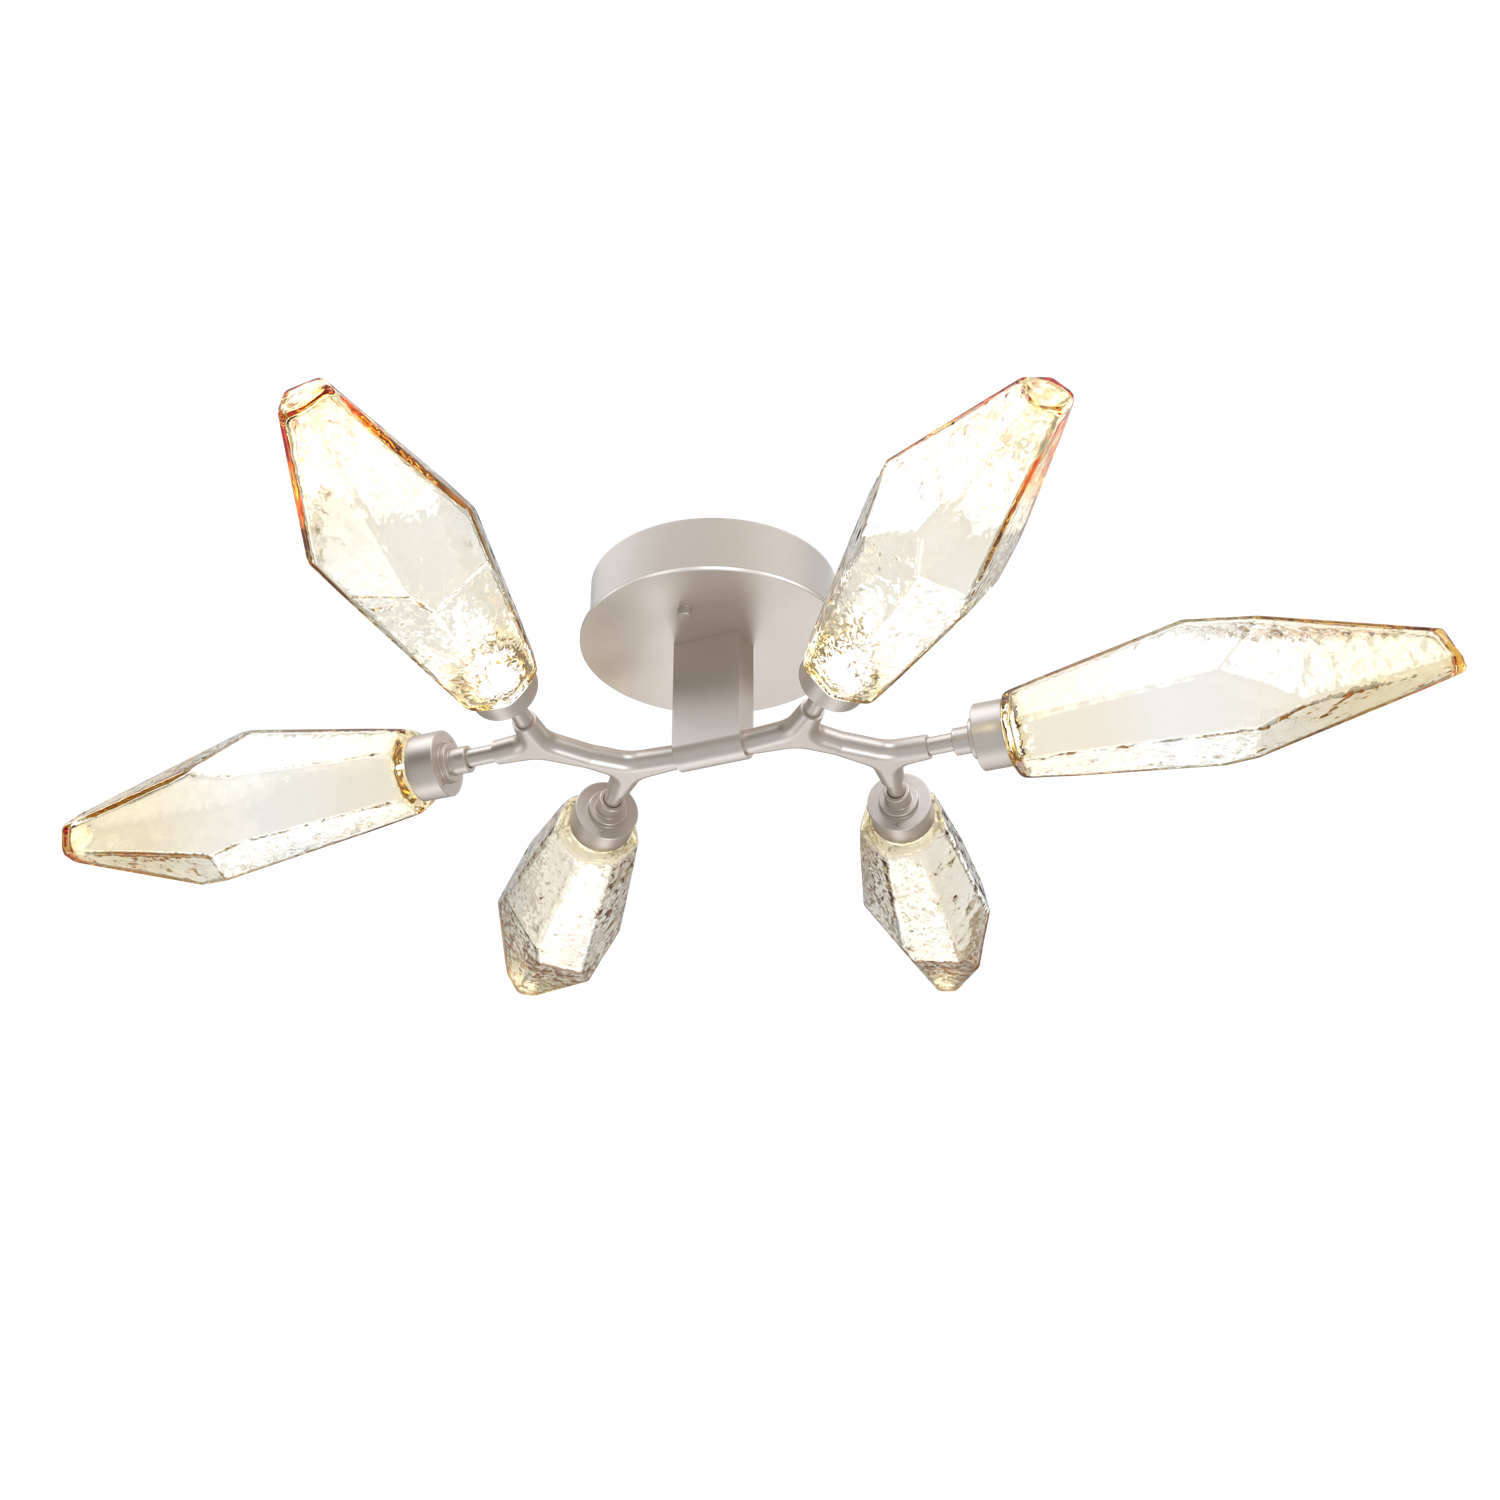 CLB0050-01-BS-CA-Hammerton-Studio-Rock-Crystal-flush-mount-light-with-beige-silver-finish-and-chilled-amber-blown-glass-shades-and-LED-lamping